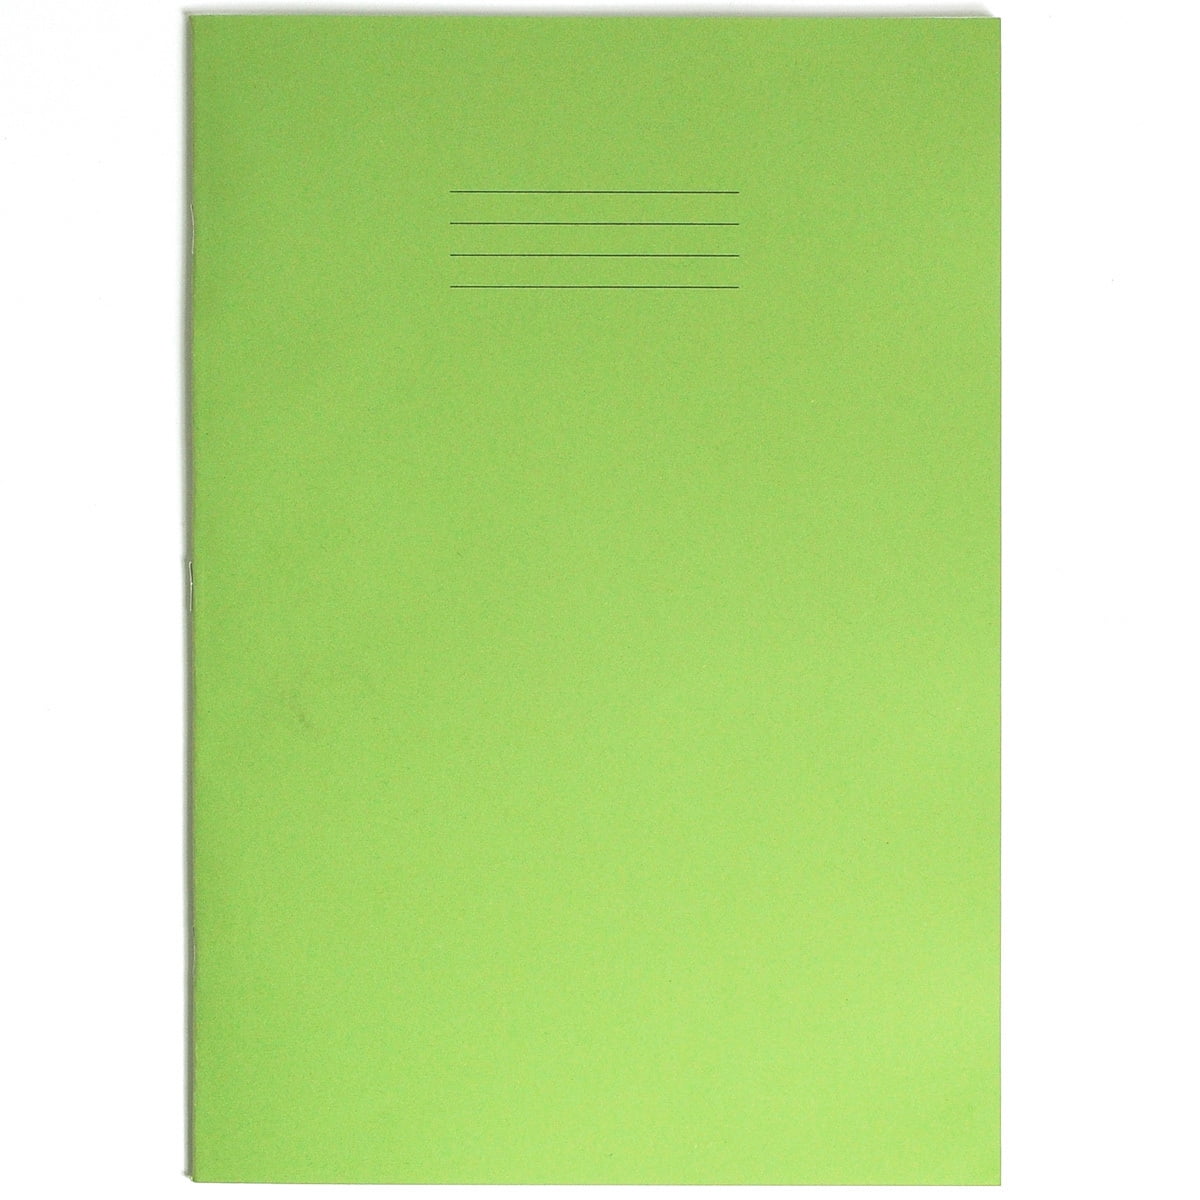 A4 Orange Plastic Cover Exercise Note Books Feint Ruled 80 Page